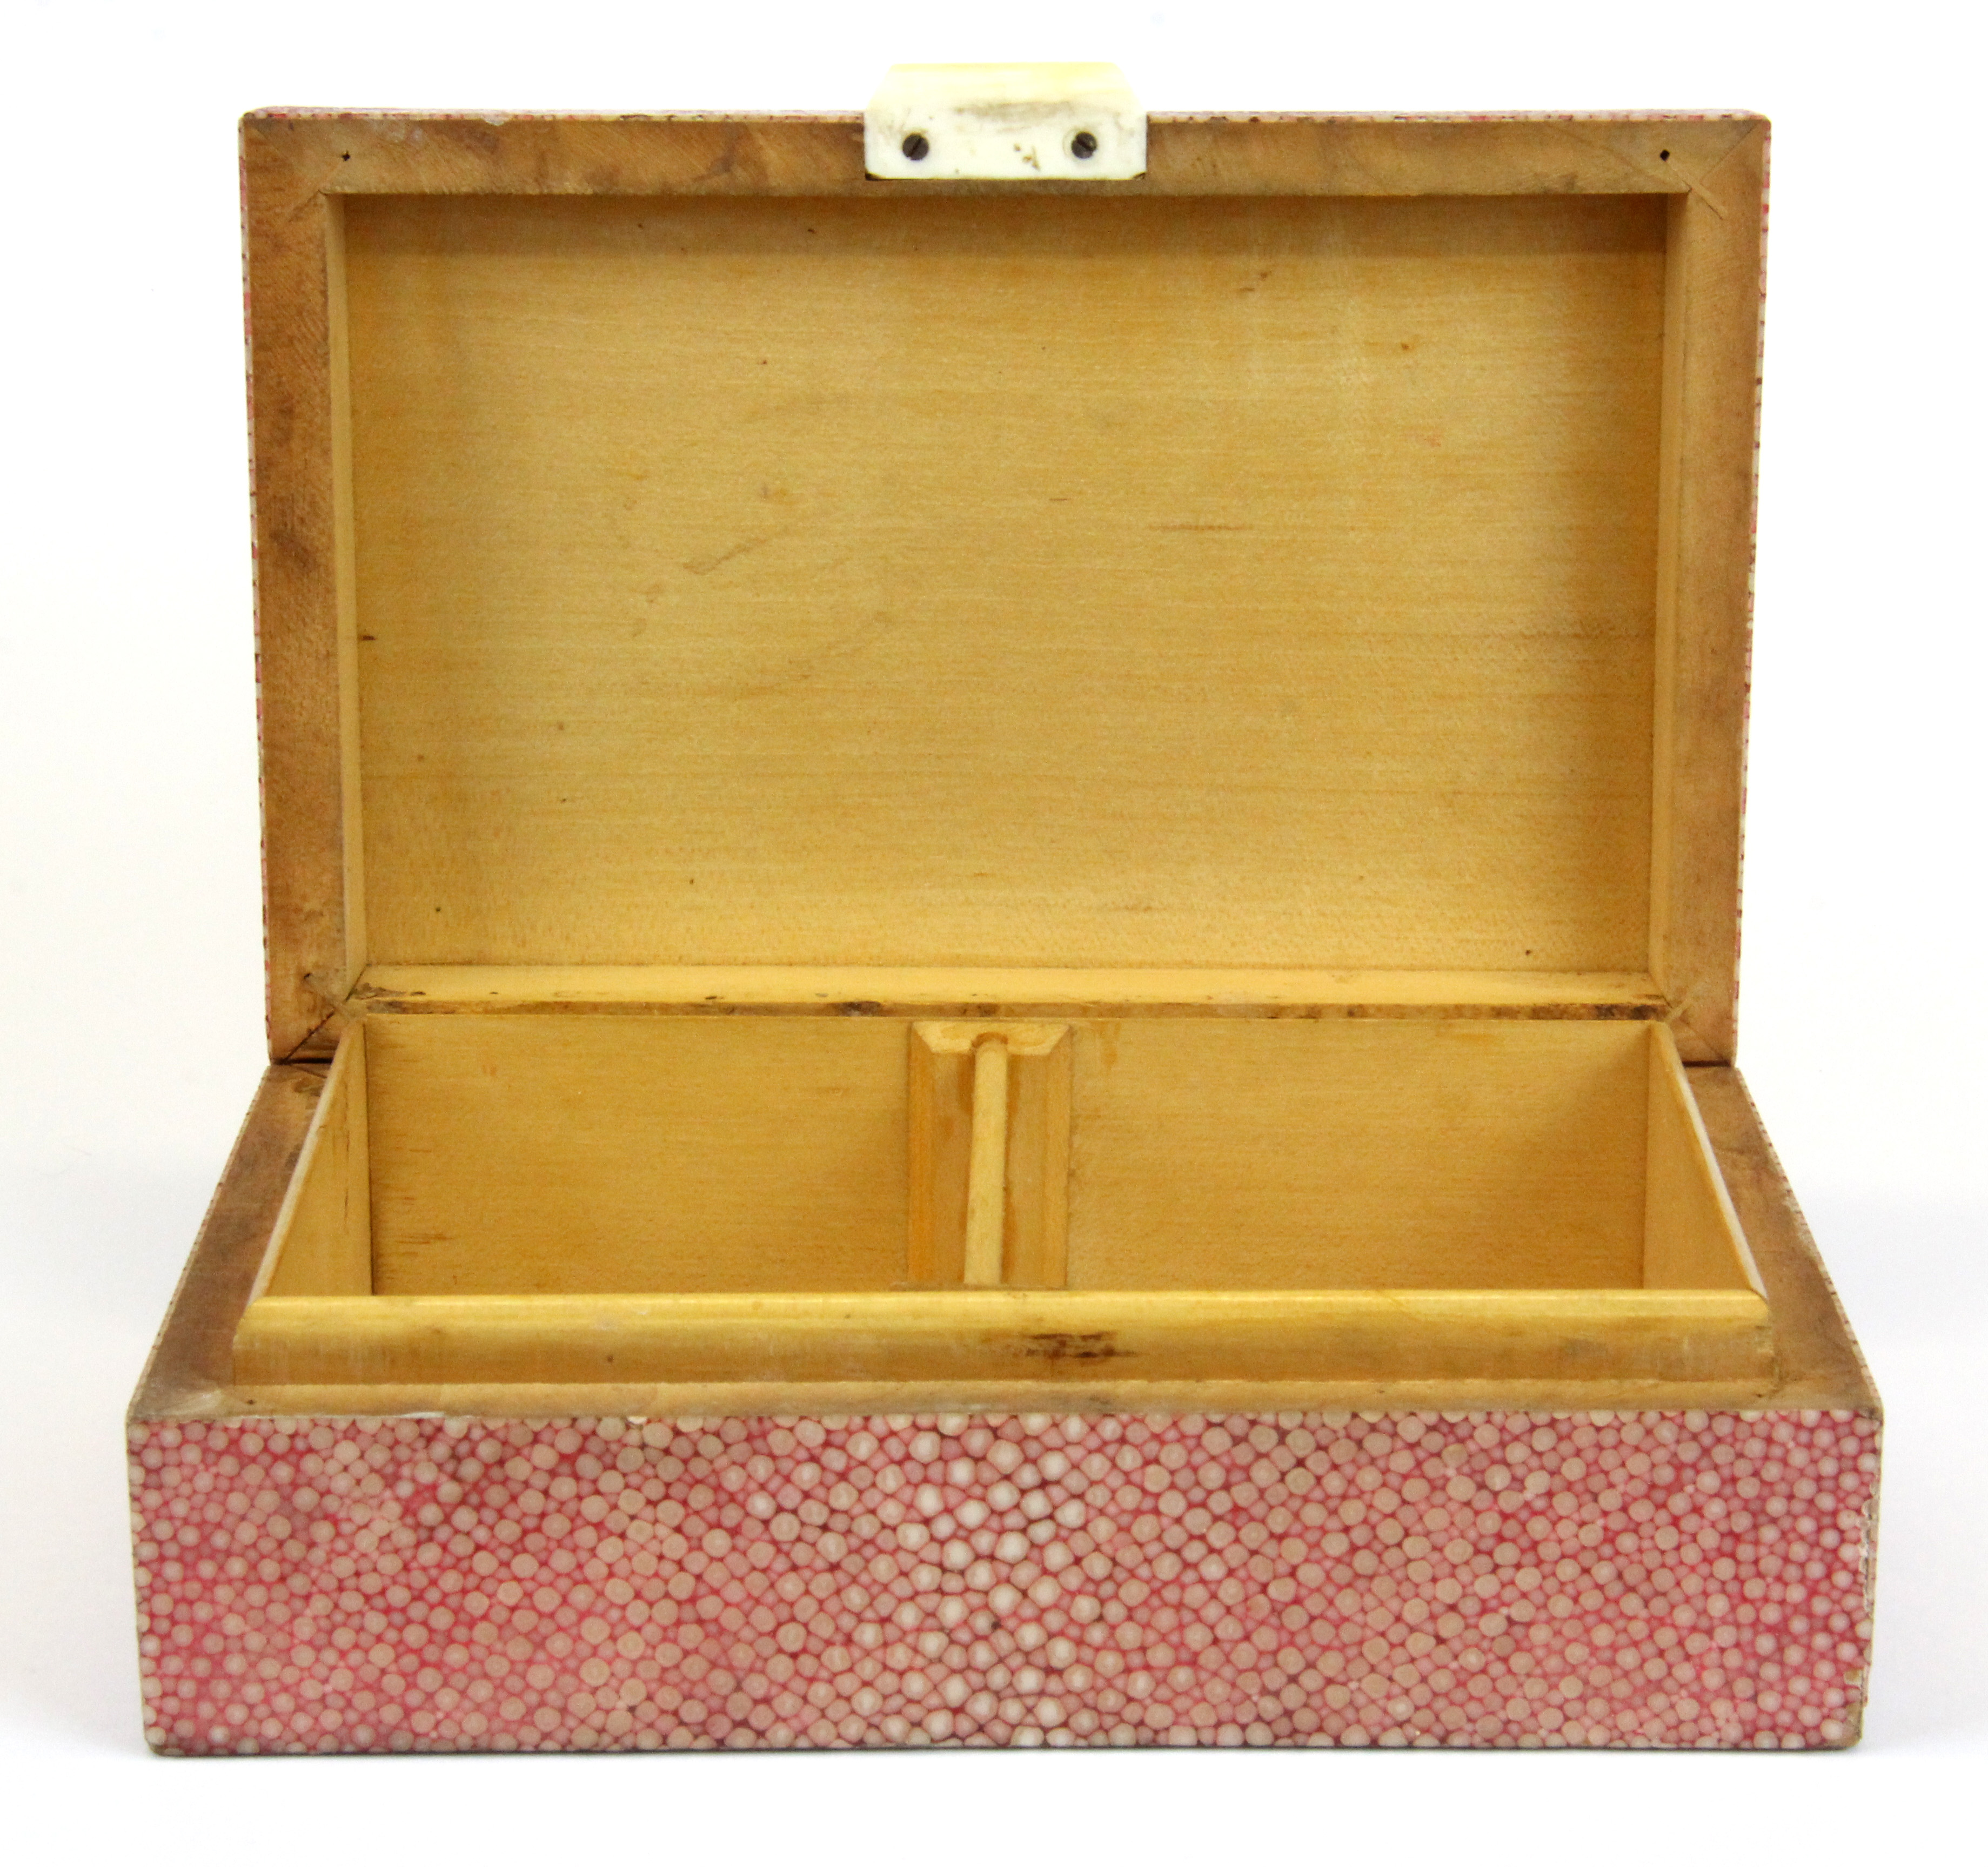 A 1920's shagreen covered wooden cigarette box, size 17 x 11 x 5.5cm. - Image 2 of 2